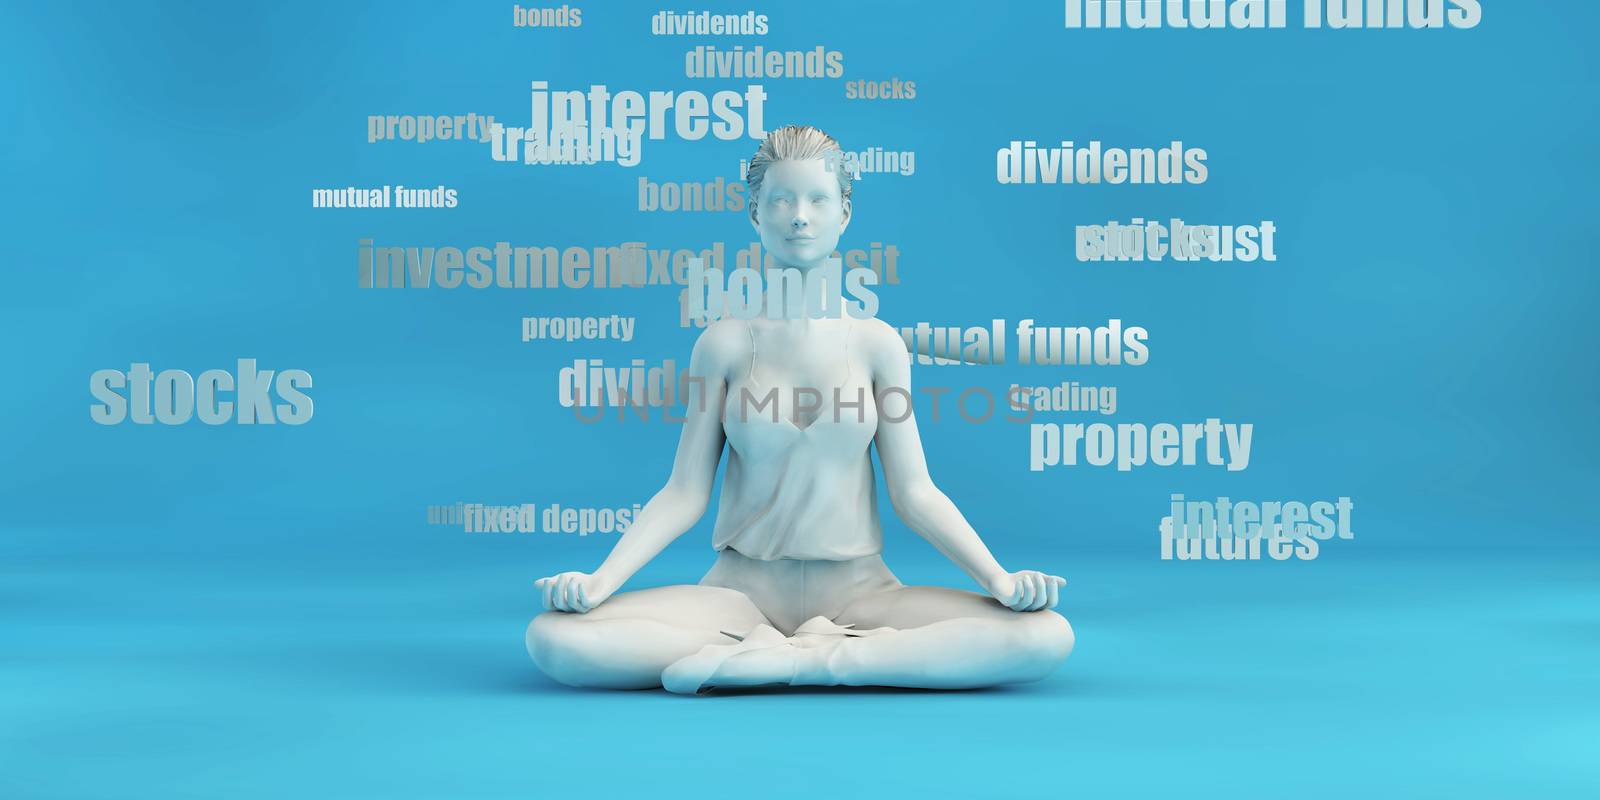 Personal Investment Options Concept with Woman Meditating